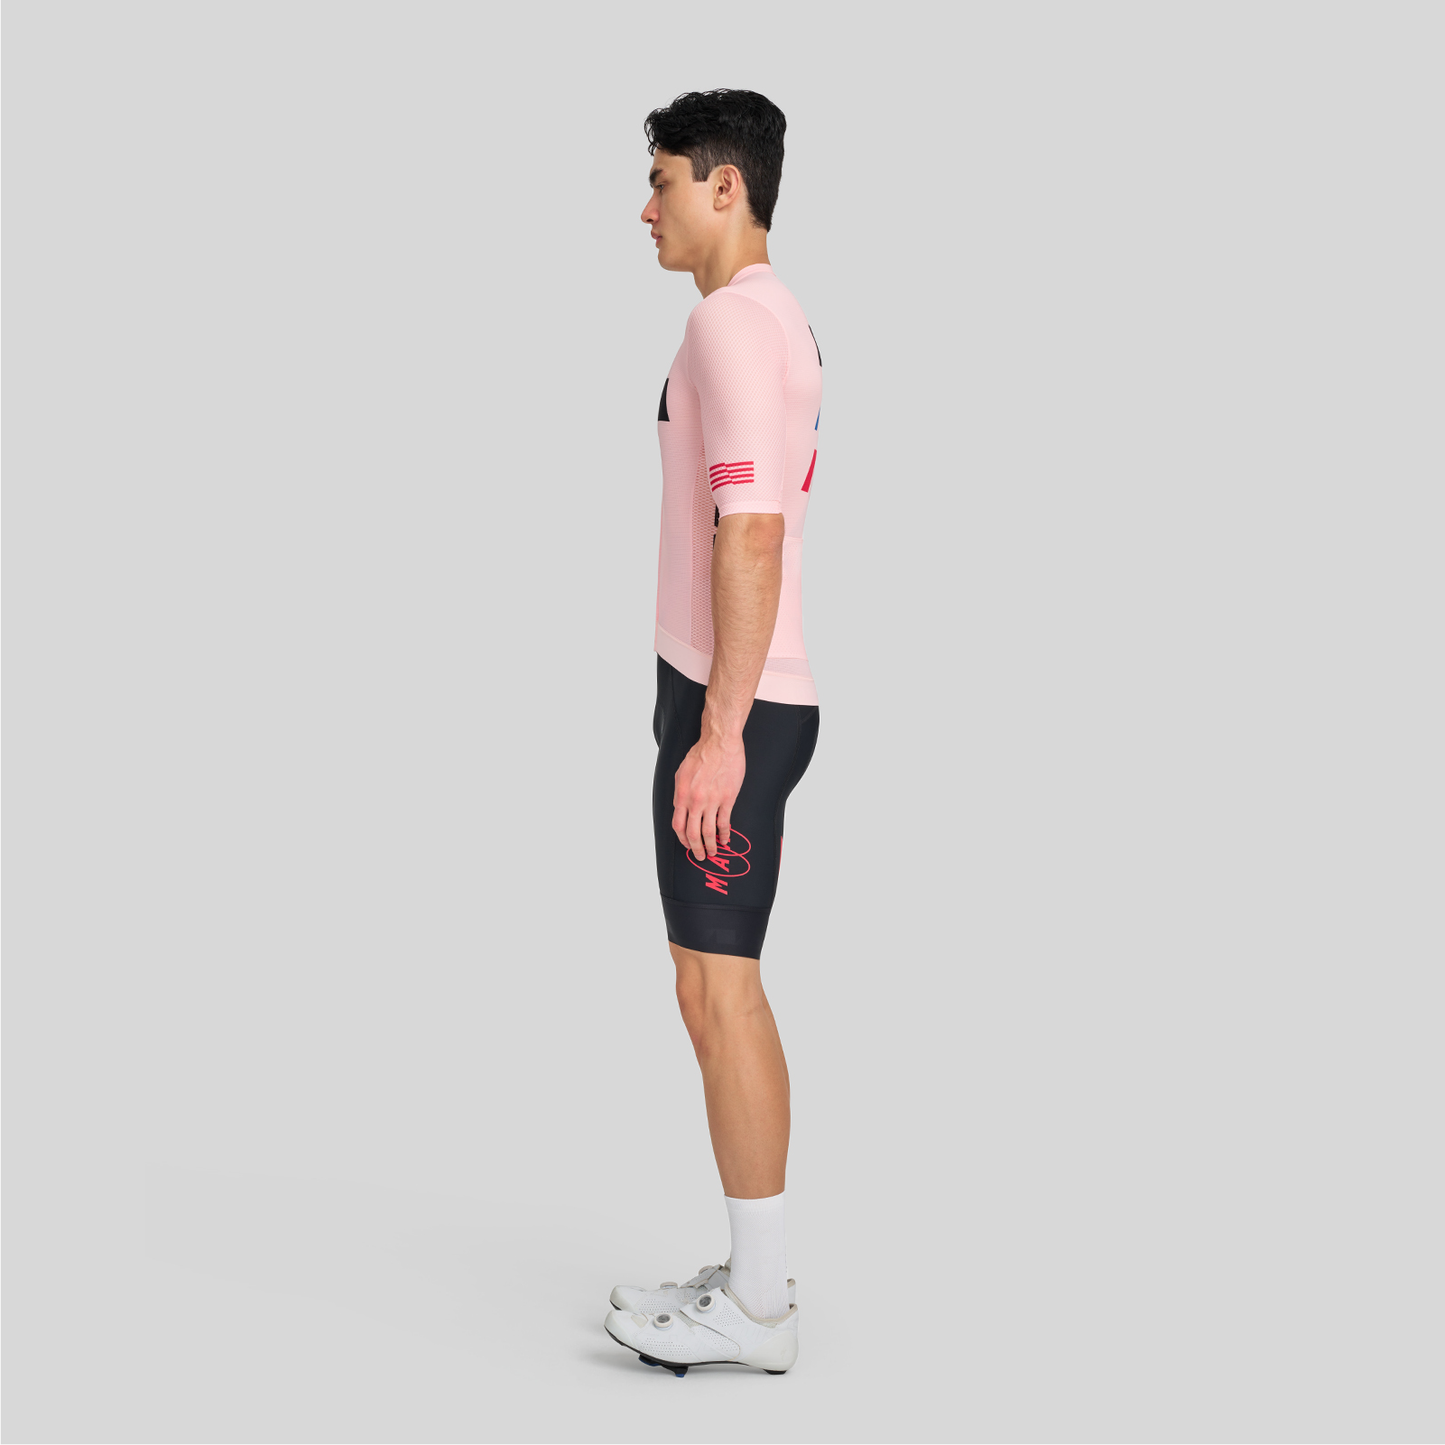 Trace Pro Air Jersey Pale Pink